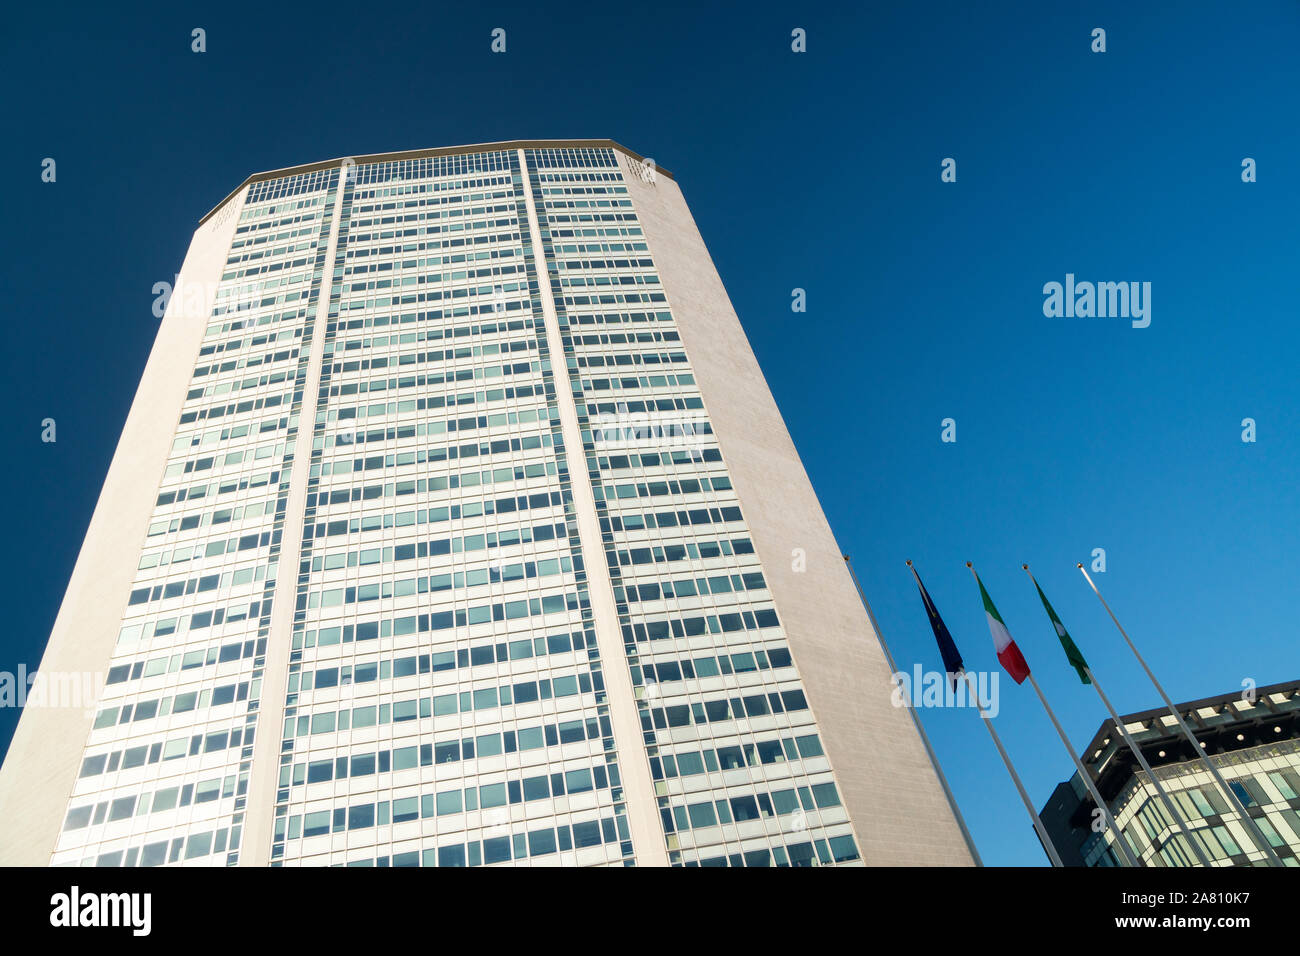 Milan, Italy: skyscraper Pirelli Tower, commonly known as Pirellone, against blue sky background. Stock Photo